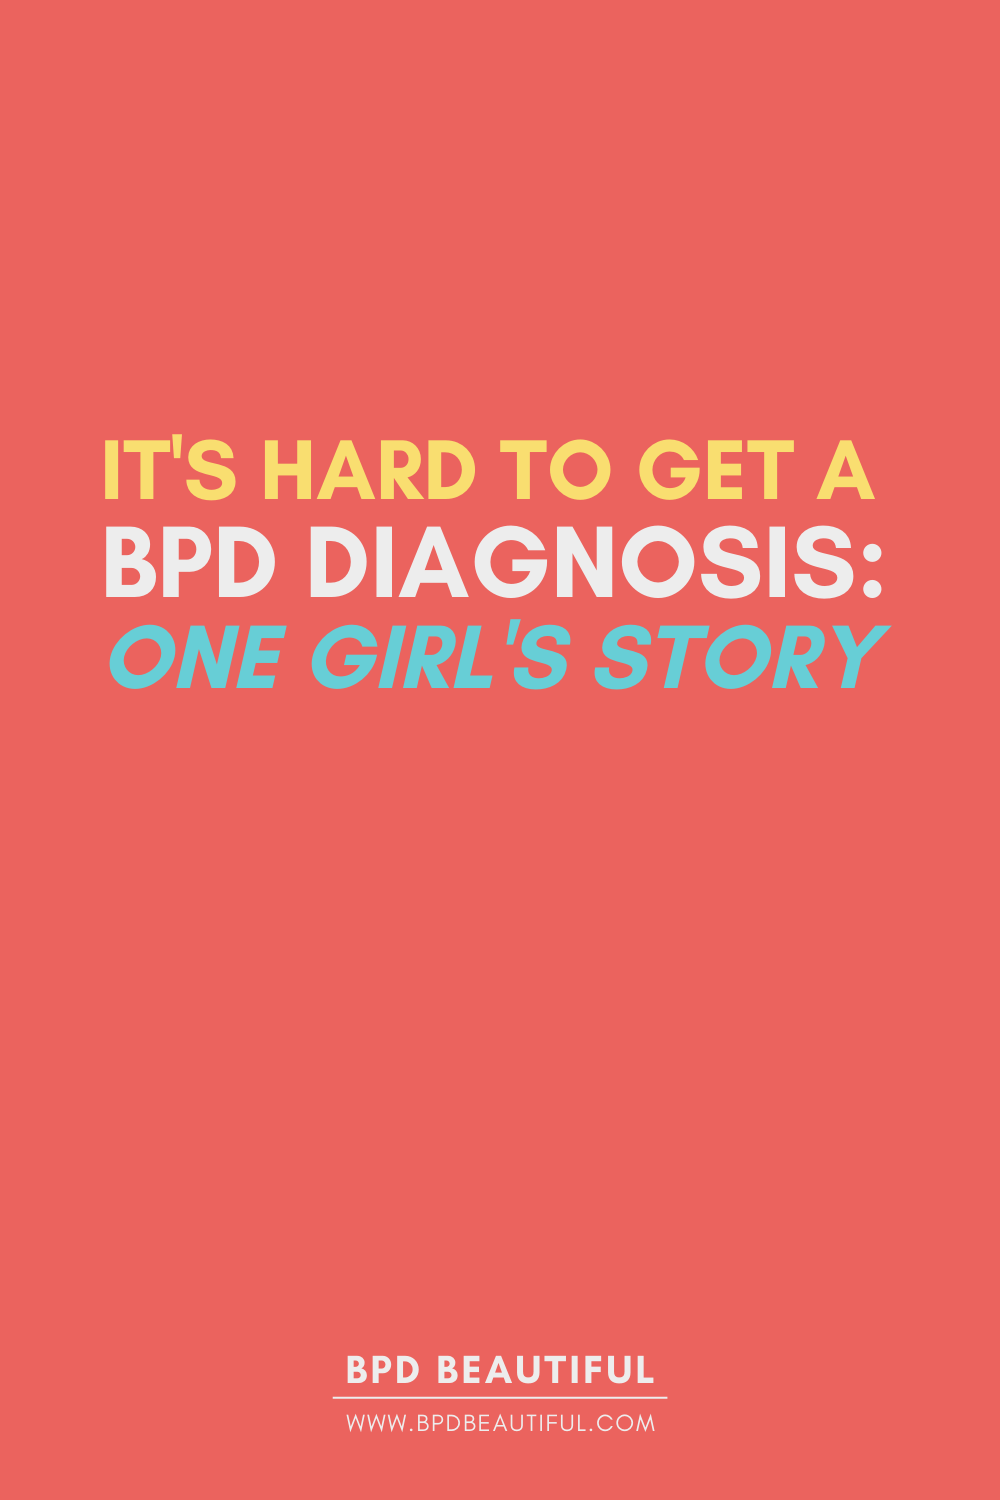 it's hard to get a BPD diagnosis - books about bpd title graphic (pin to pinterest)